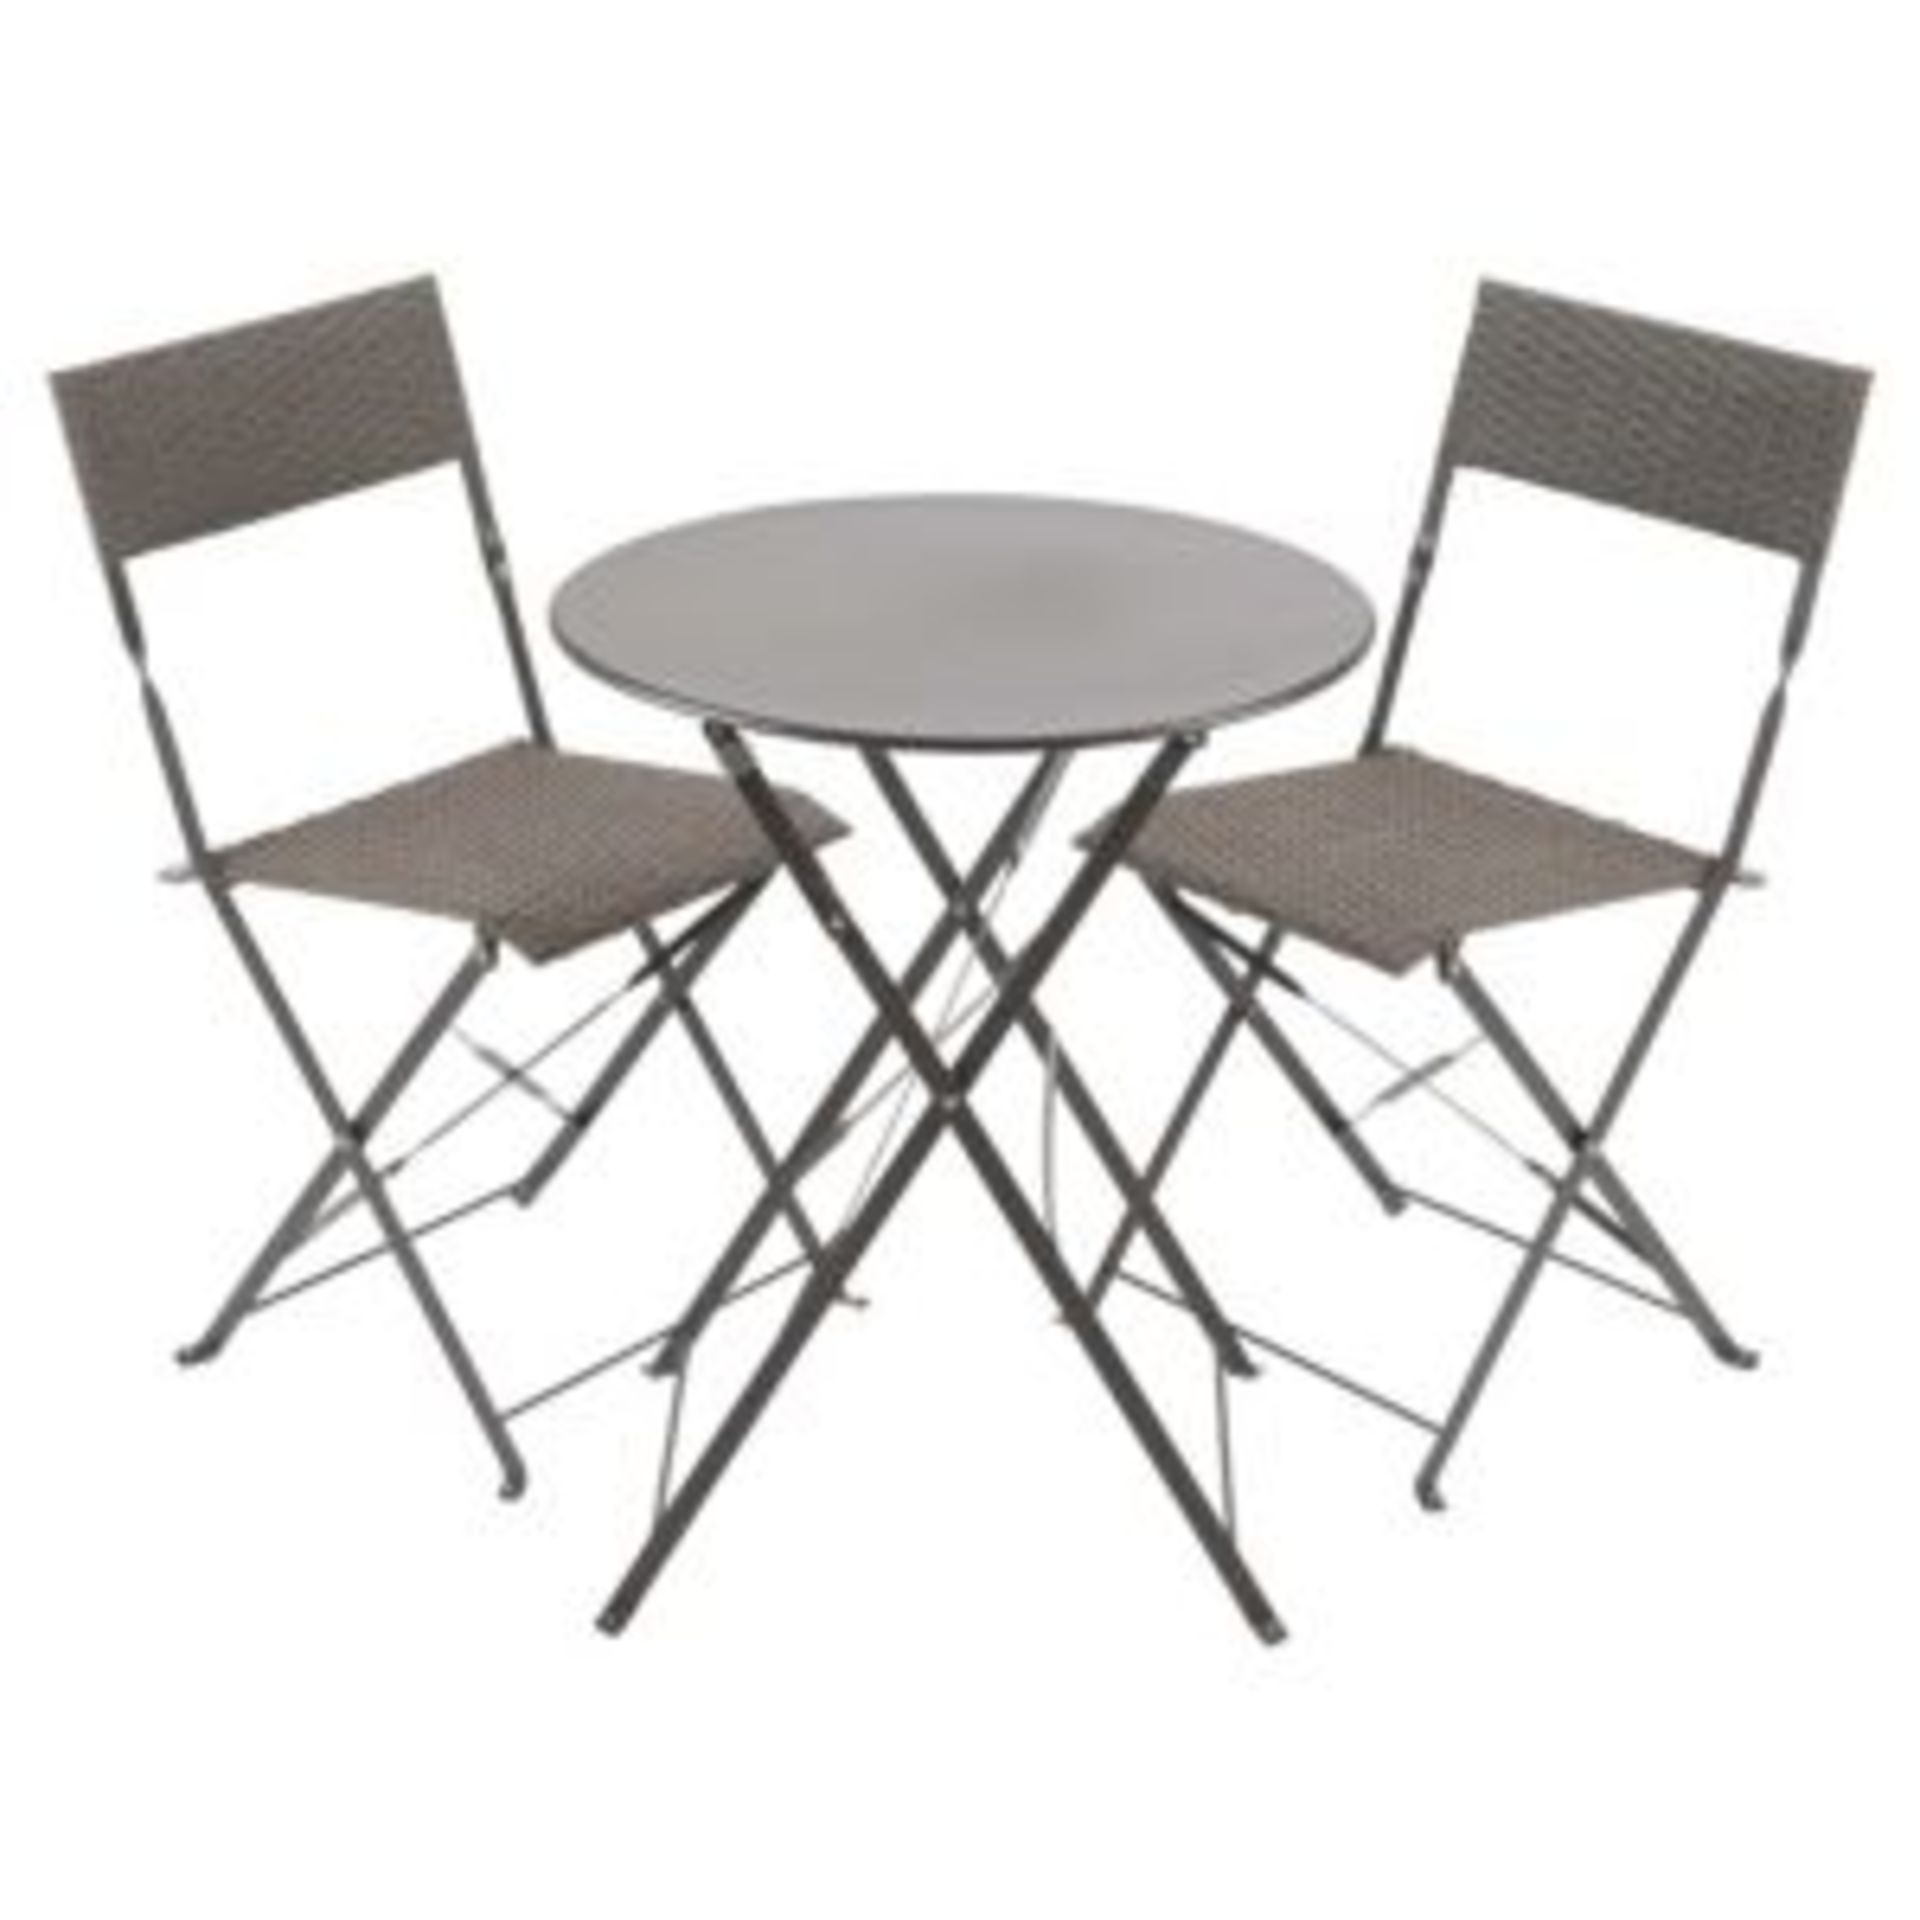 V Brand New Atlas Rattan Folding Bistro Set - Metal Table - Two Chairs - ISP £91.99 - Image 3 of 4